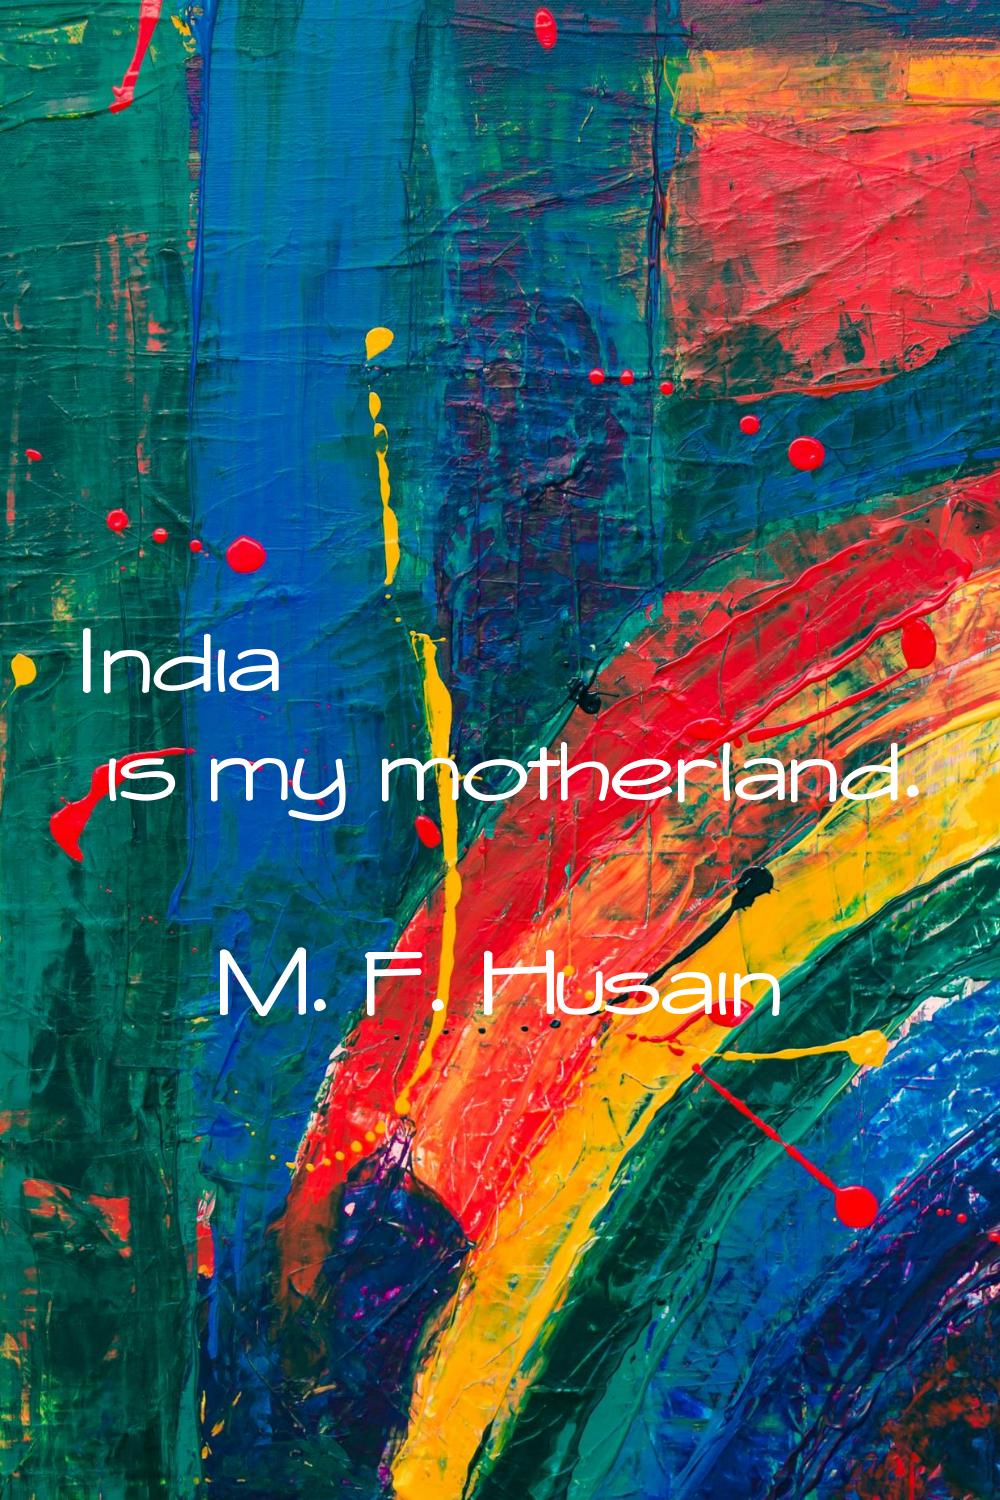 India is my motherland.